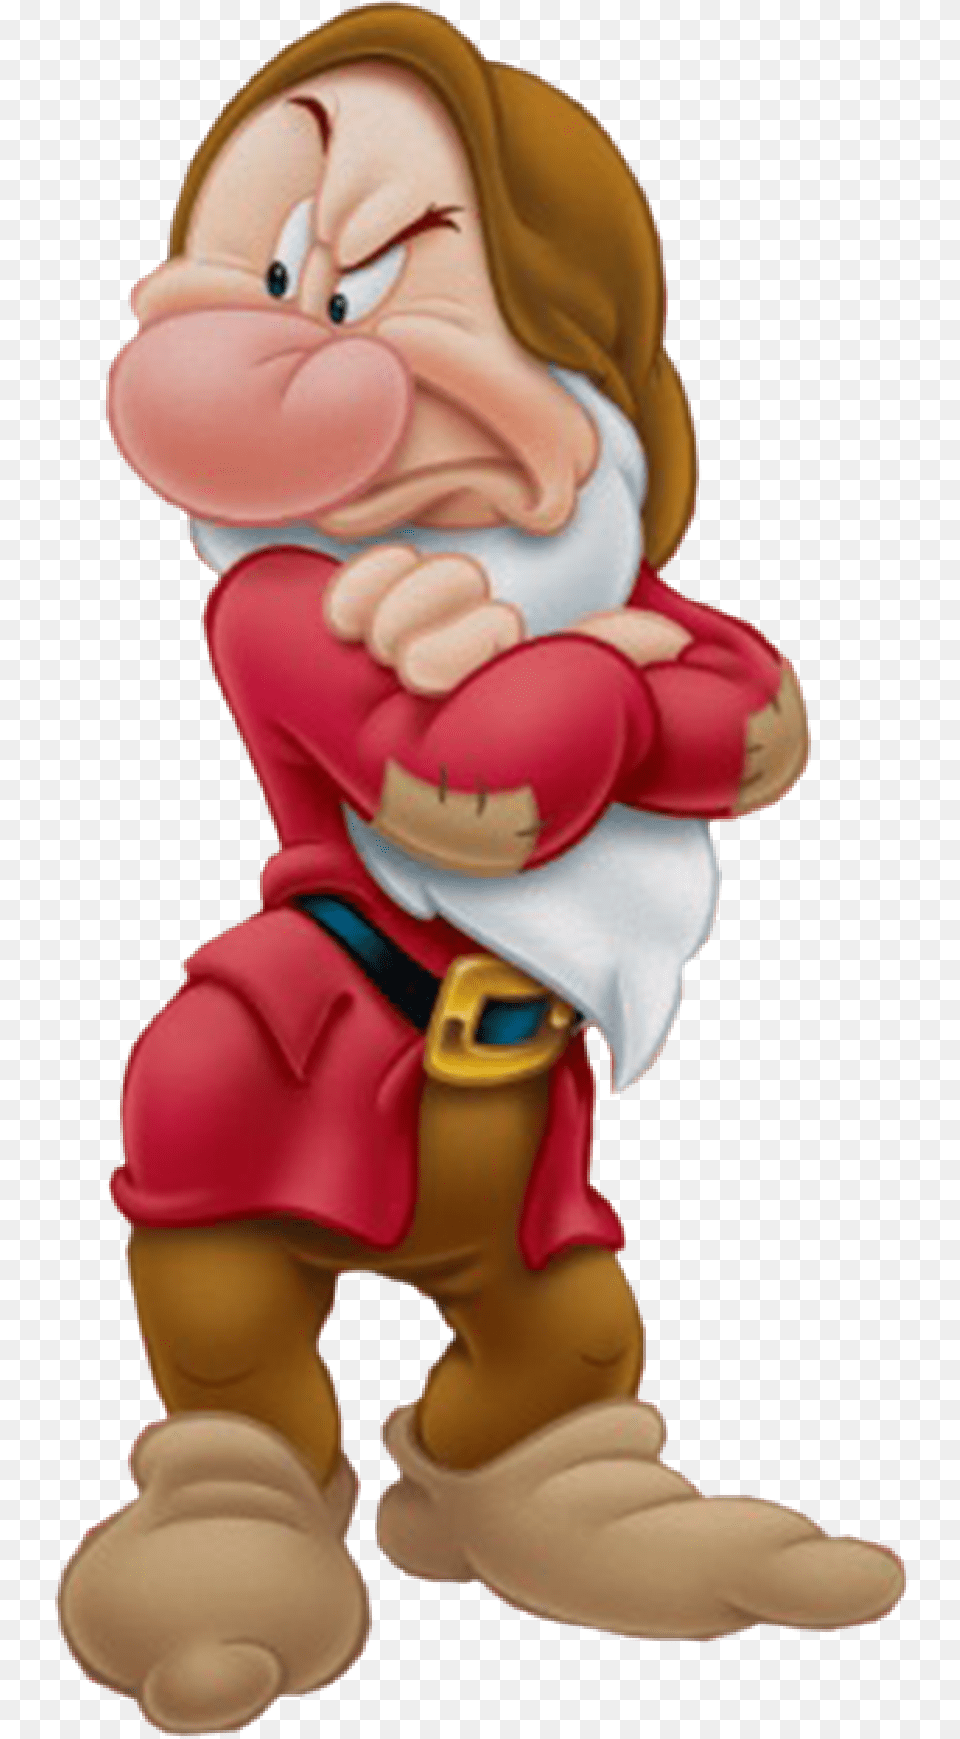 Snow White Grumpy Dwarf, Baby, Person, Cartoon, Face Png Image